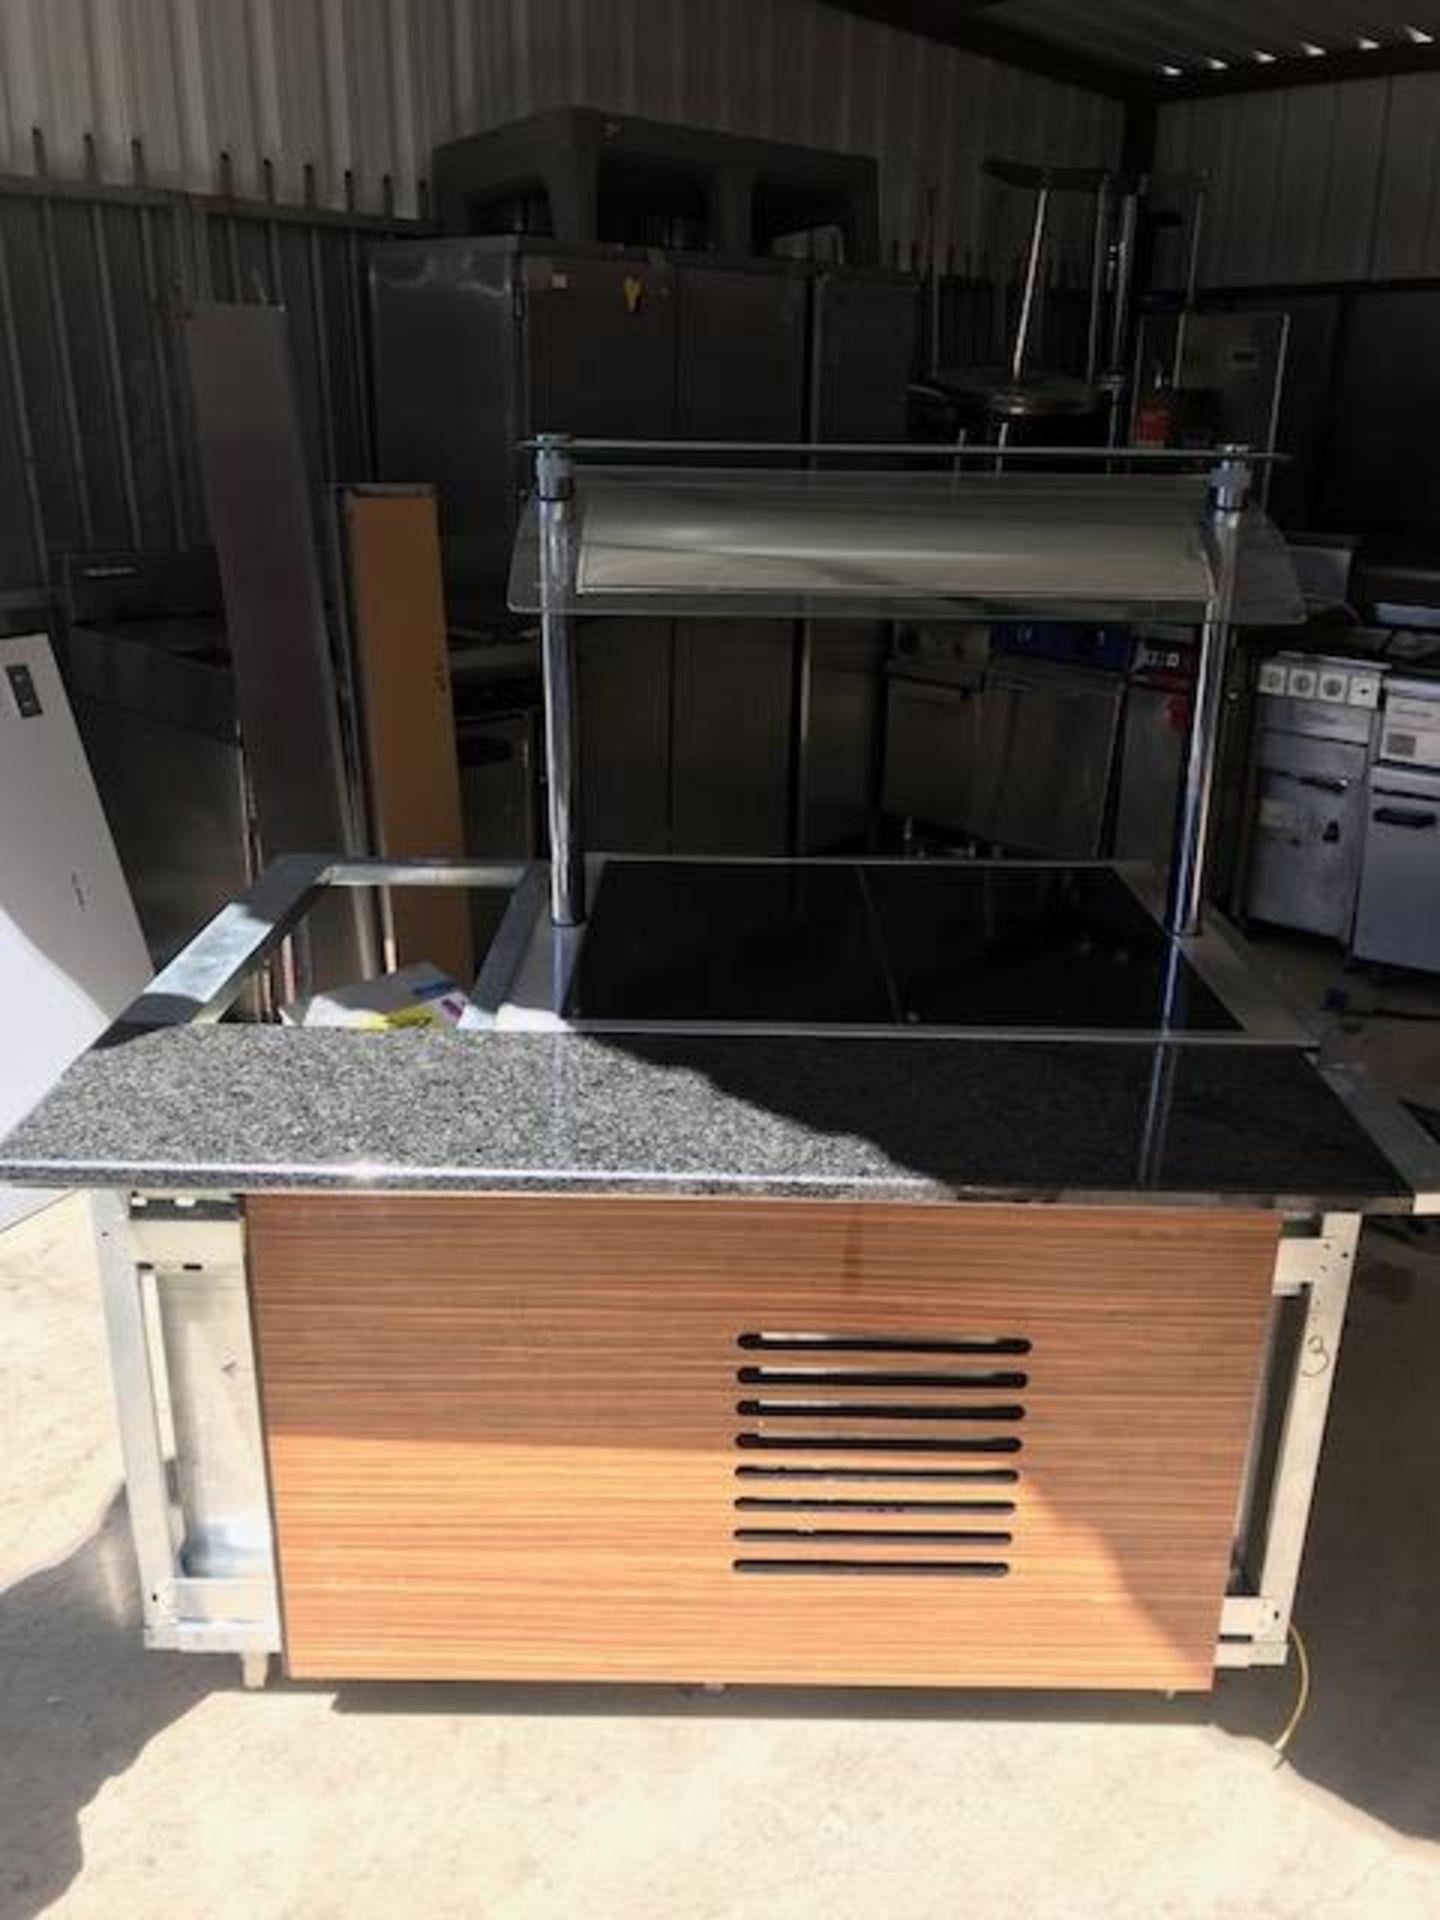 Heated and chilled display unit heated and chilled display unit. Also sold individually at £1550 for